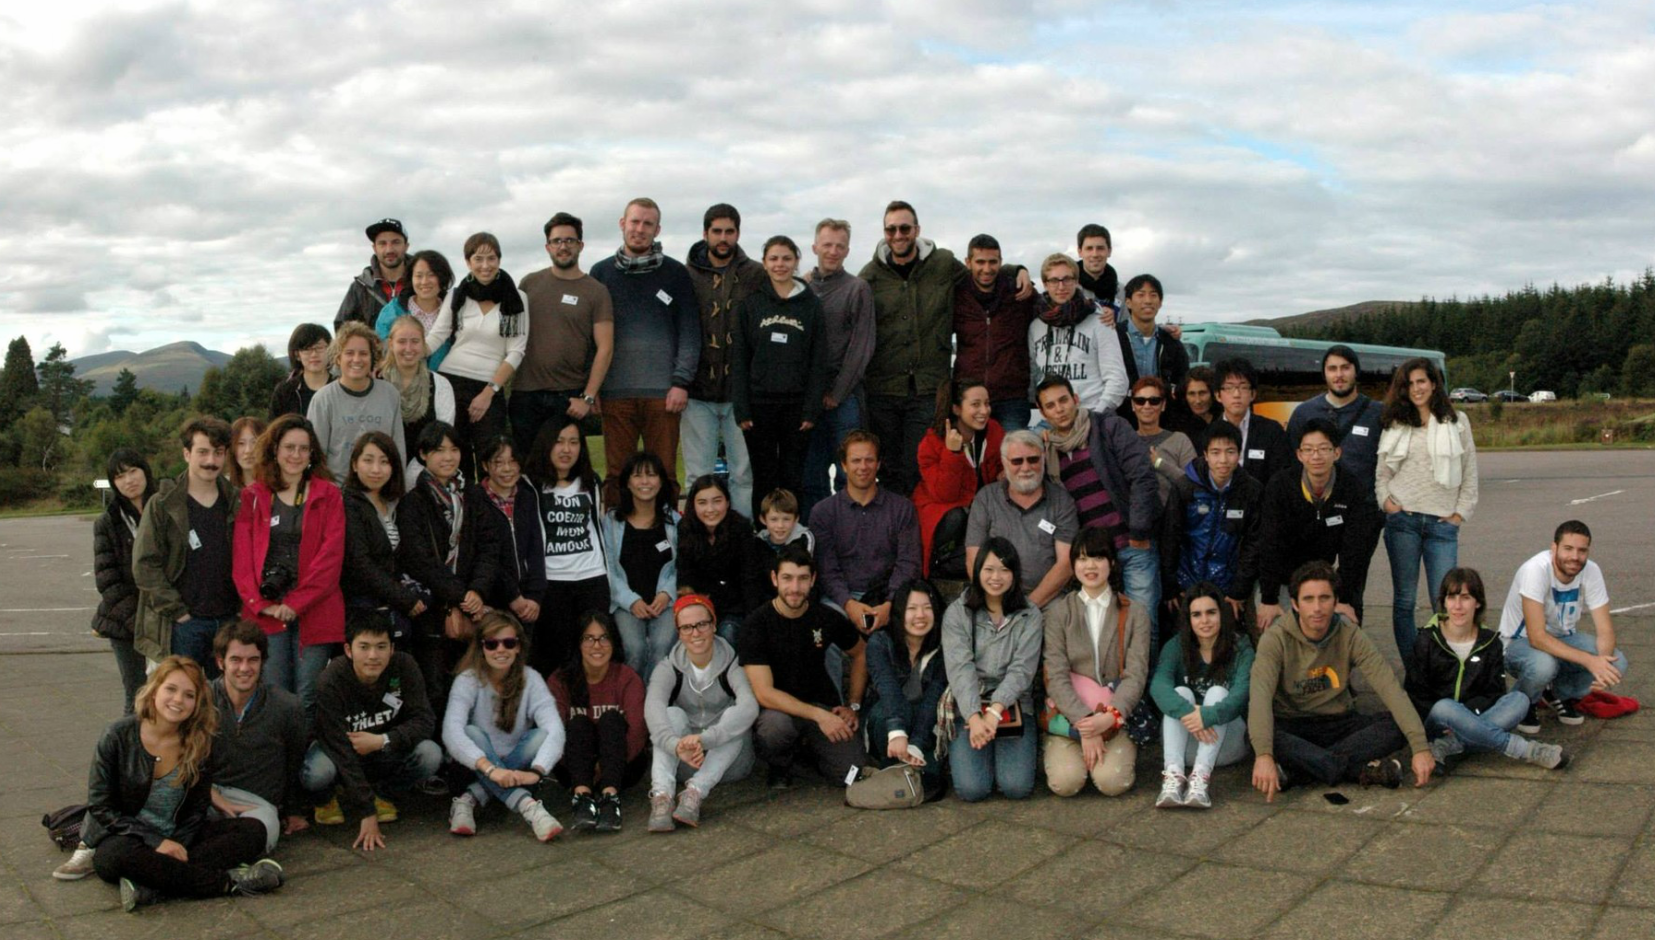 Highland trip with international students